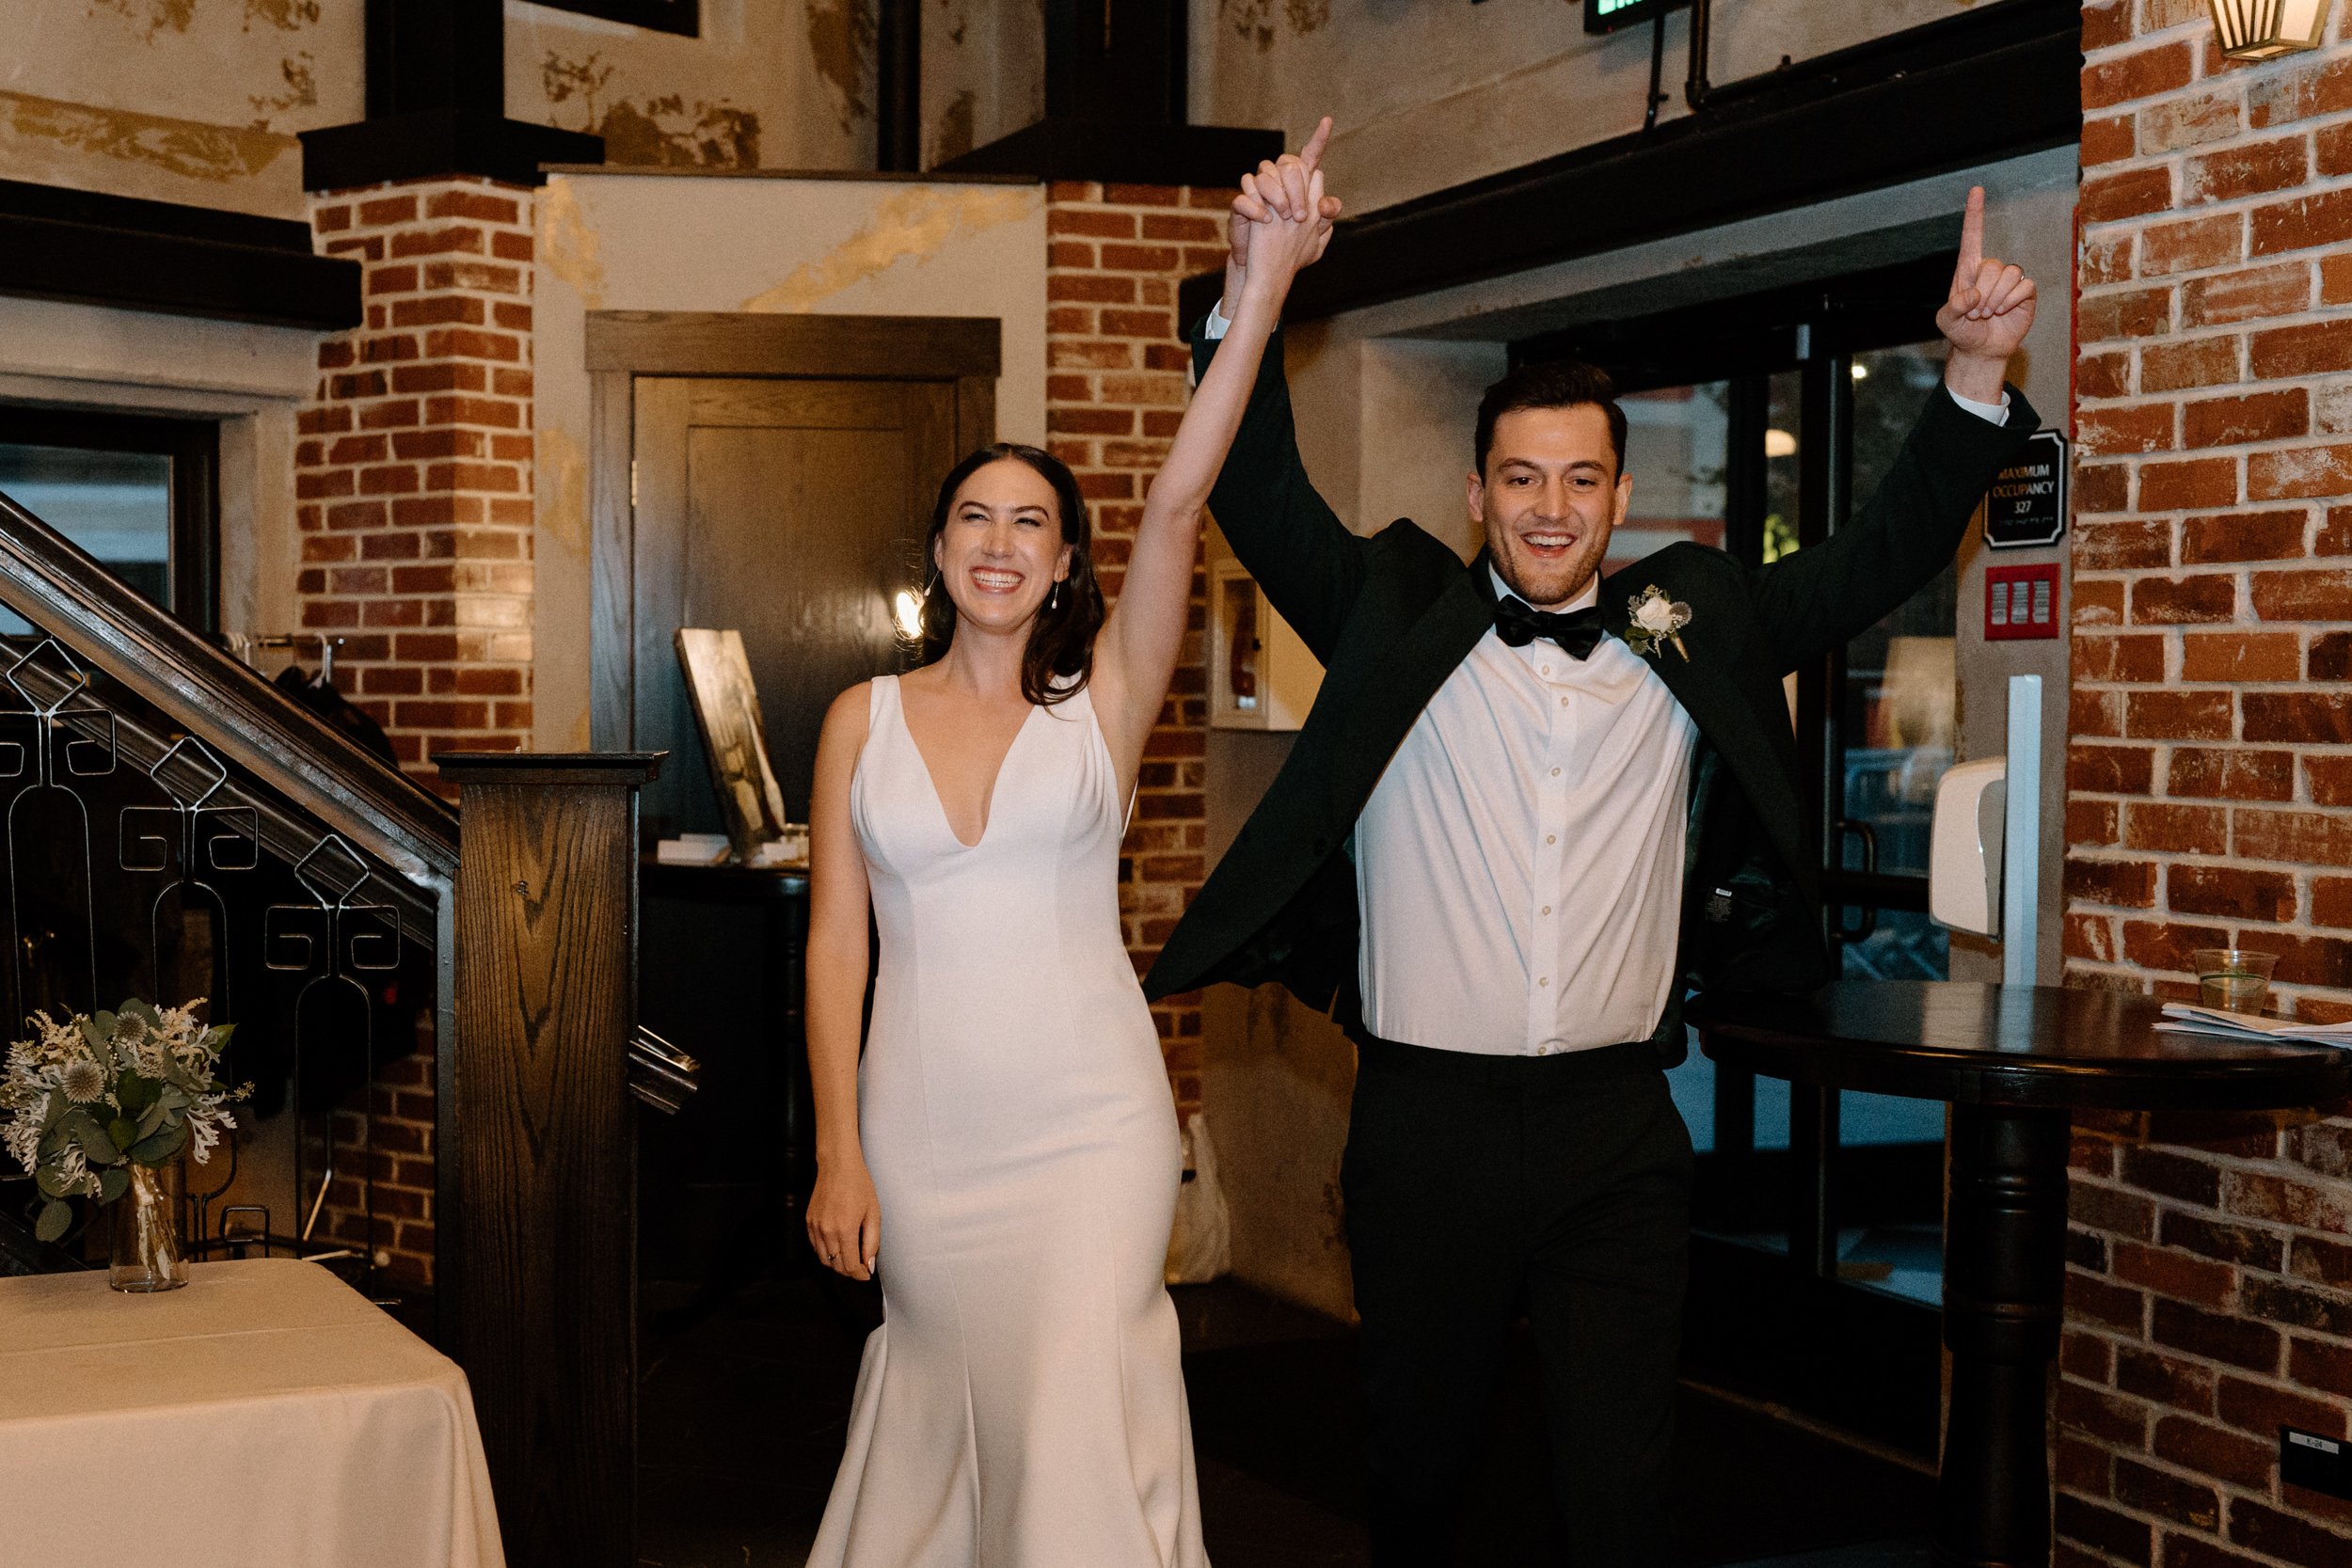 The bride and groom excitedly enter the reception